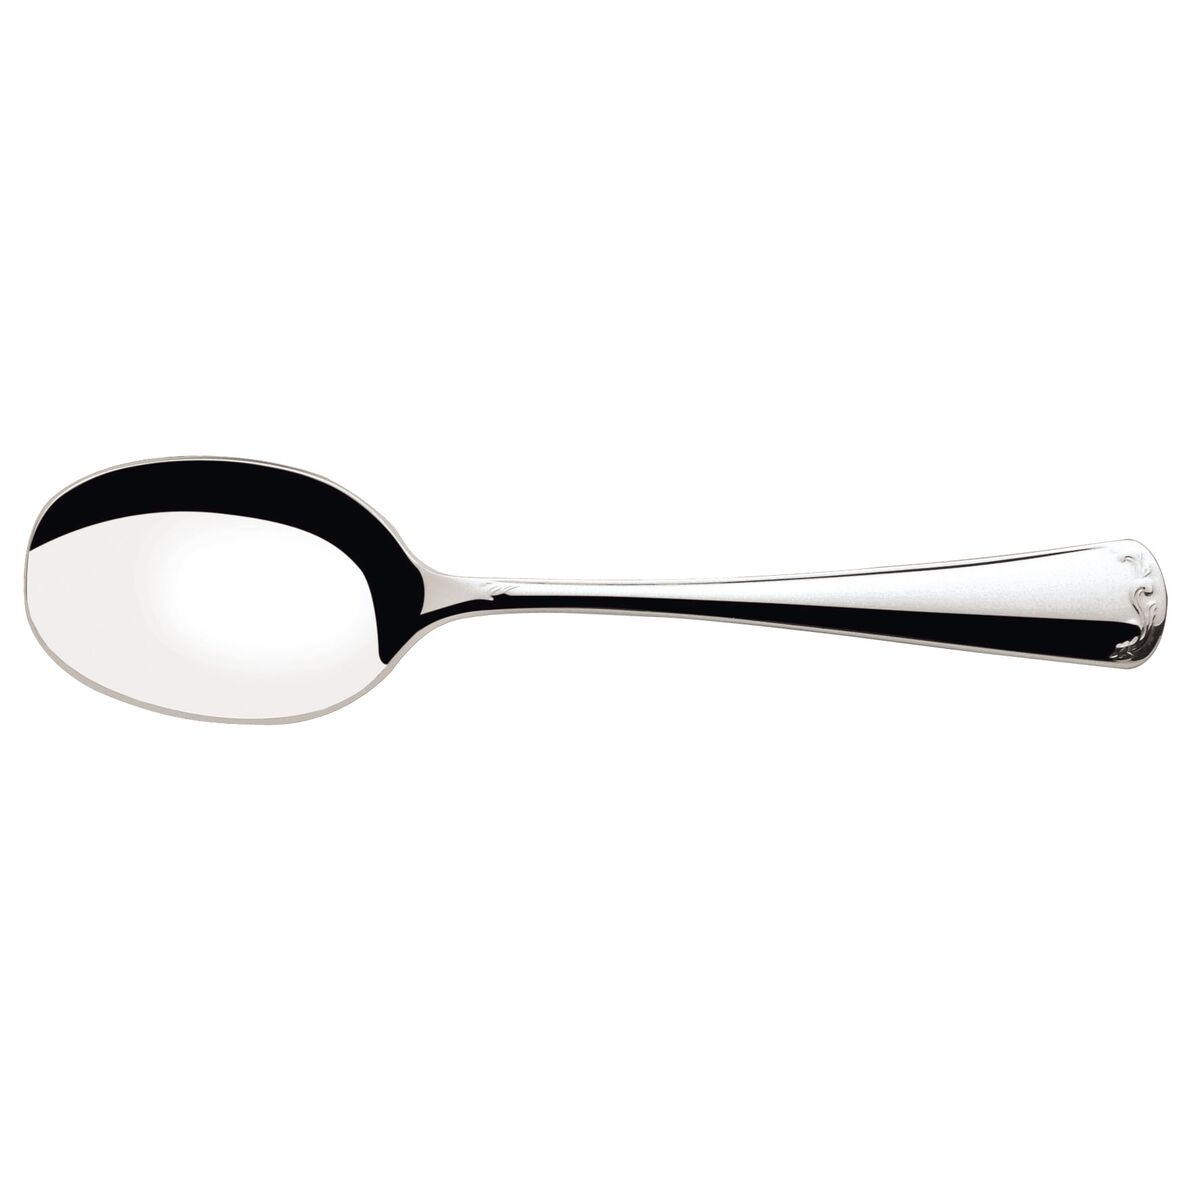 Tramontina Sevilha stainless steel soup spoon with mirror finish and relief detailing on the handle